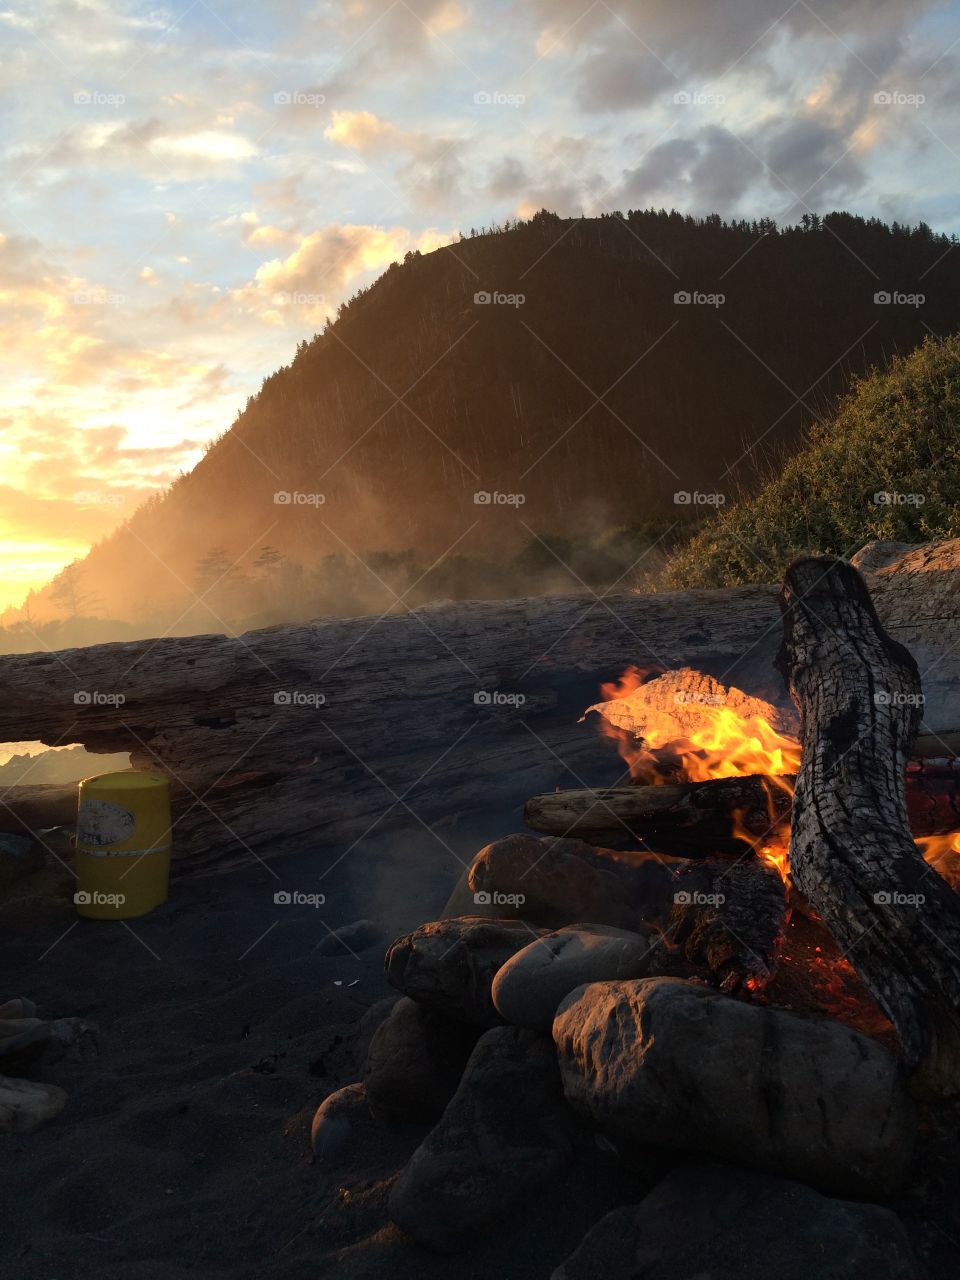 Camping and campfire in Northern California on the lost coast trail with mountains and a sunset 